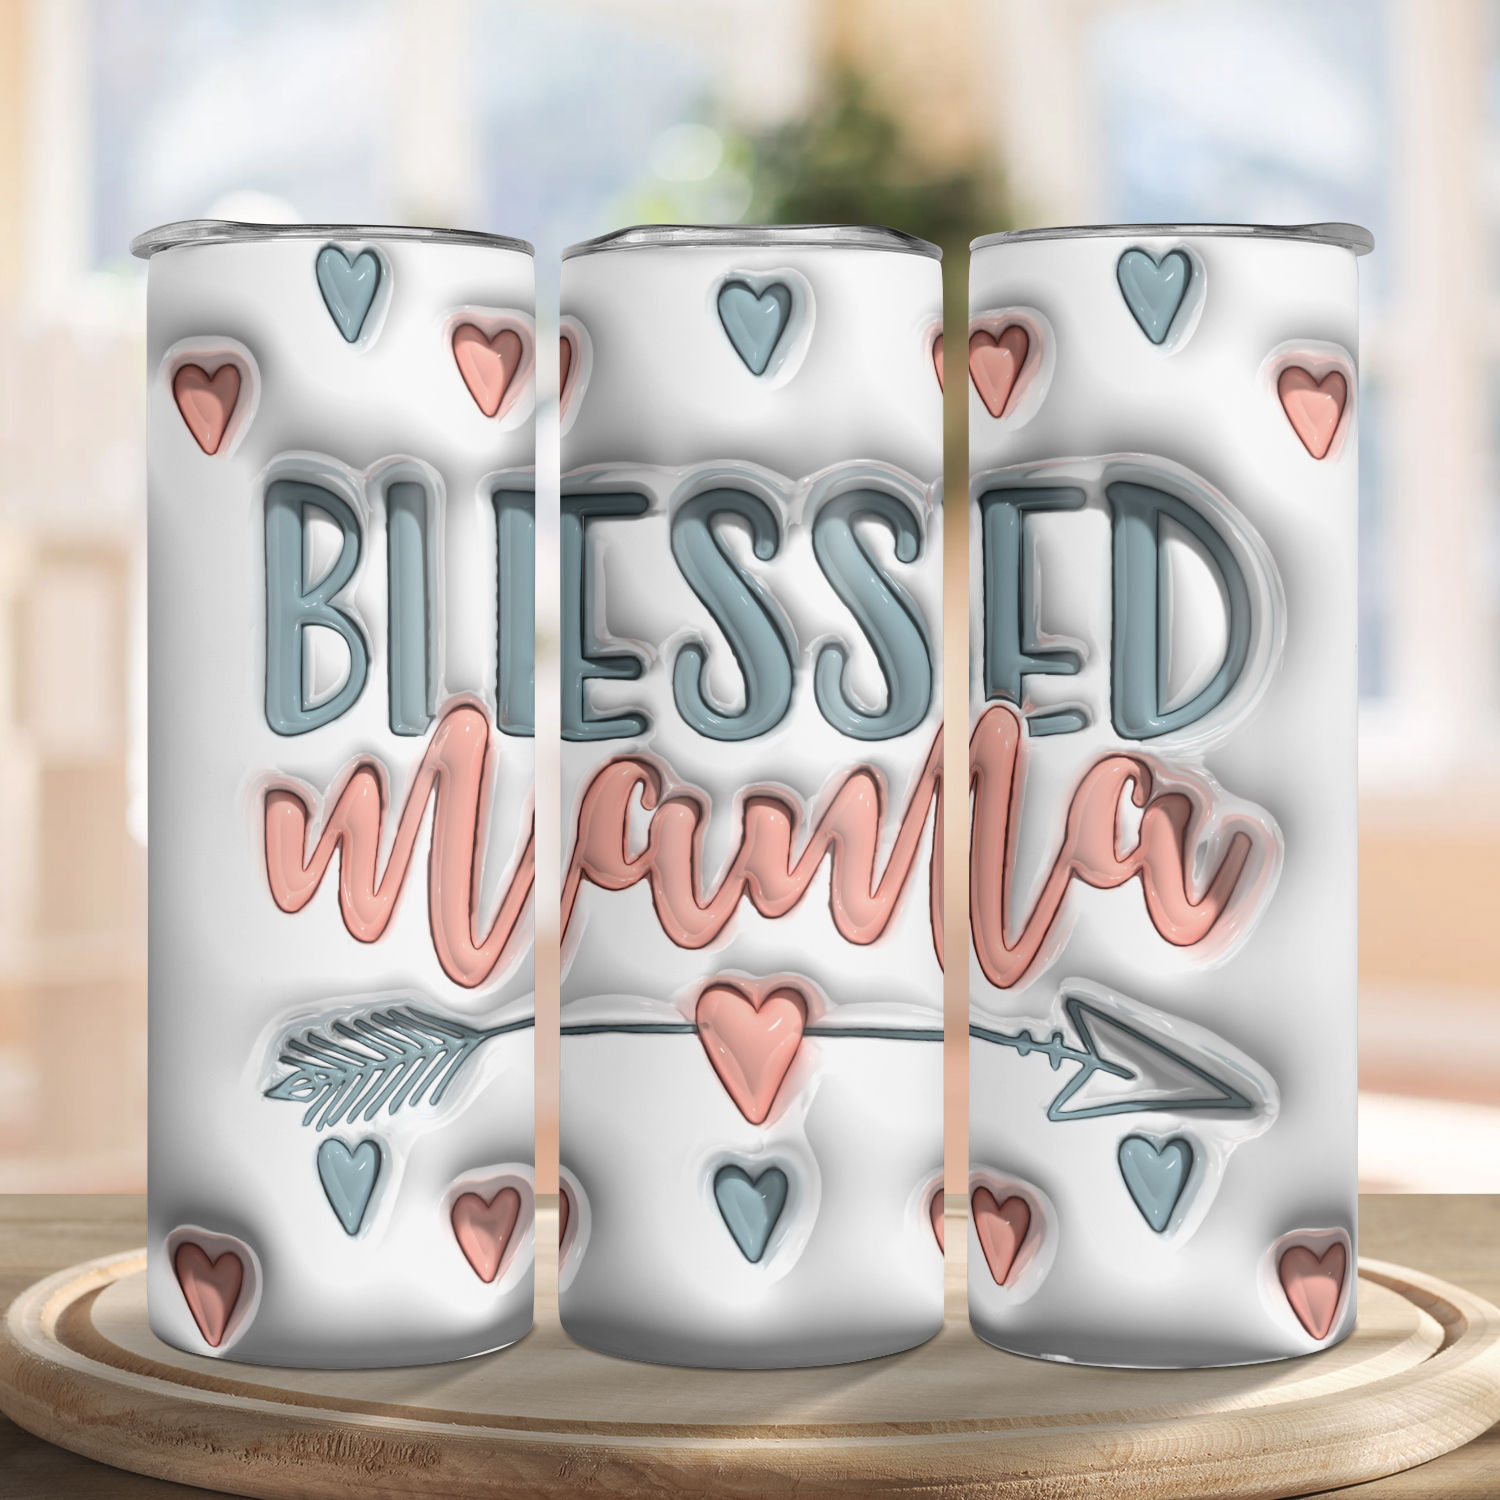 I Was Normal 3 Kids Ago - Engraved Funny Mom Tumbler, Triplet Gift Cup,  Gift For Mom Of Triplets